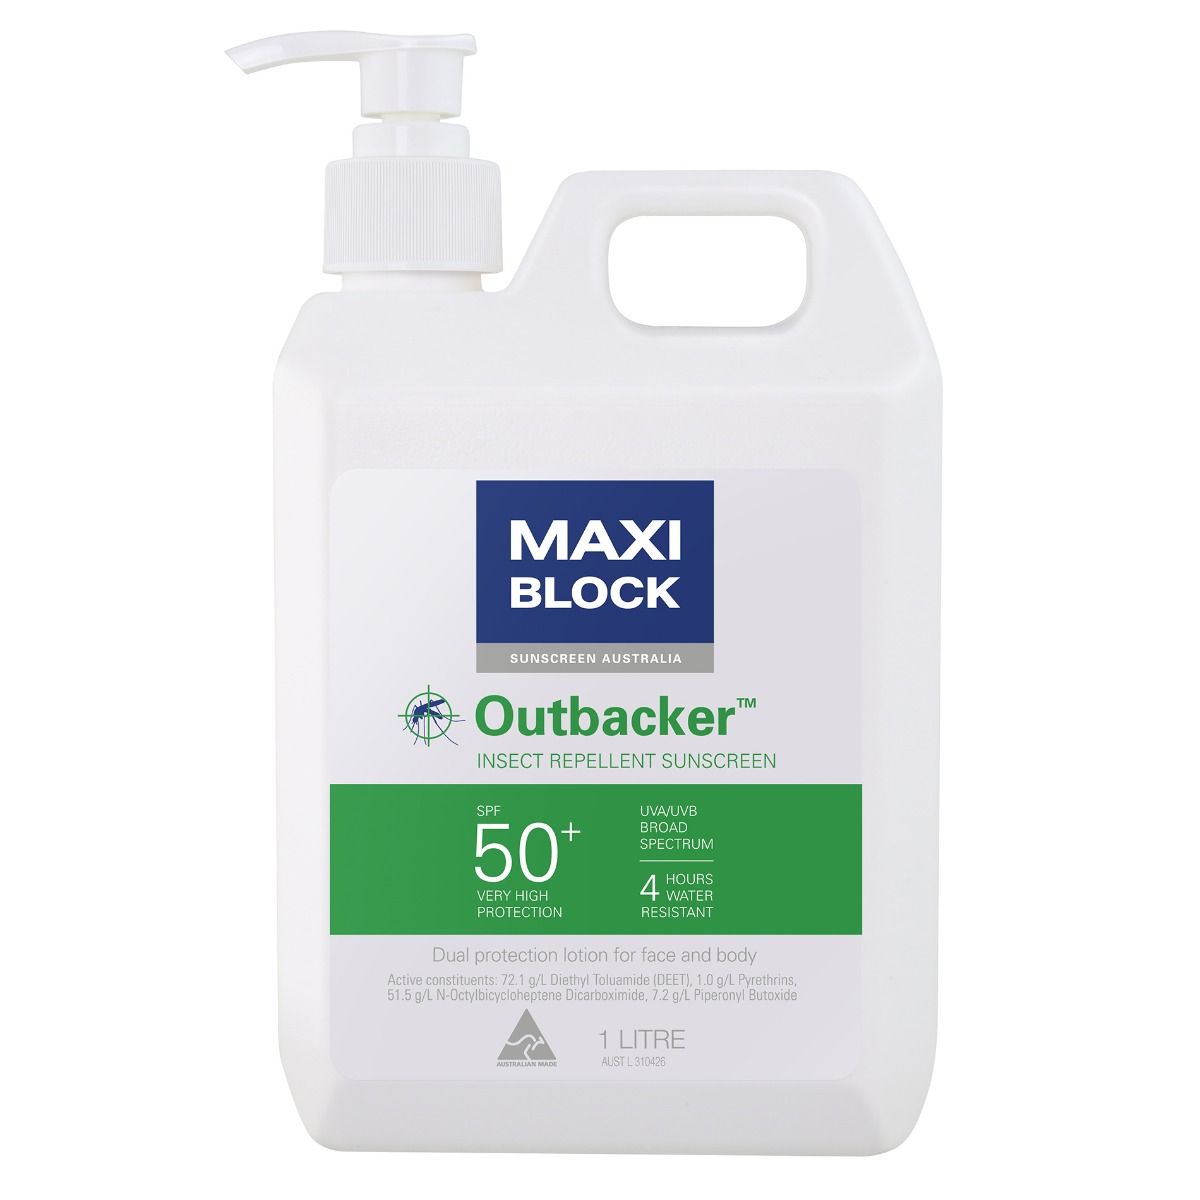 MAXIBLOCK SPF 50+ OUTBACKER 1L INSECT REPELLENT